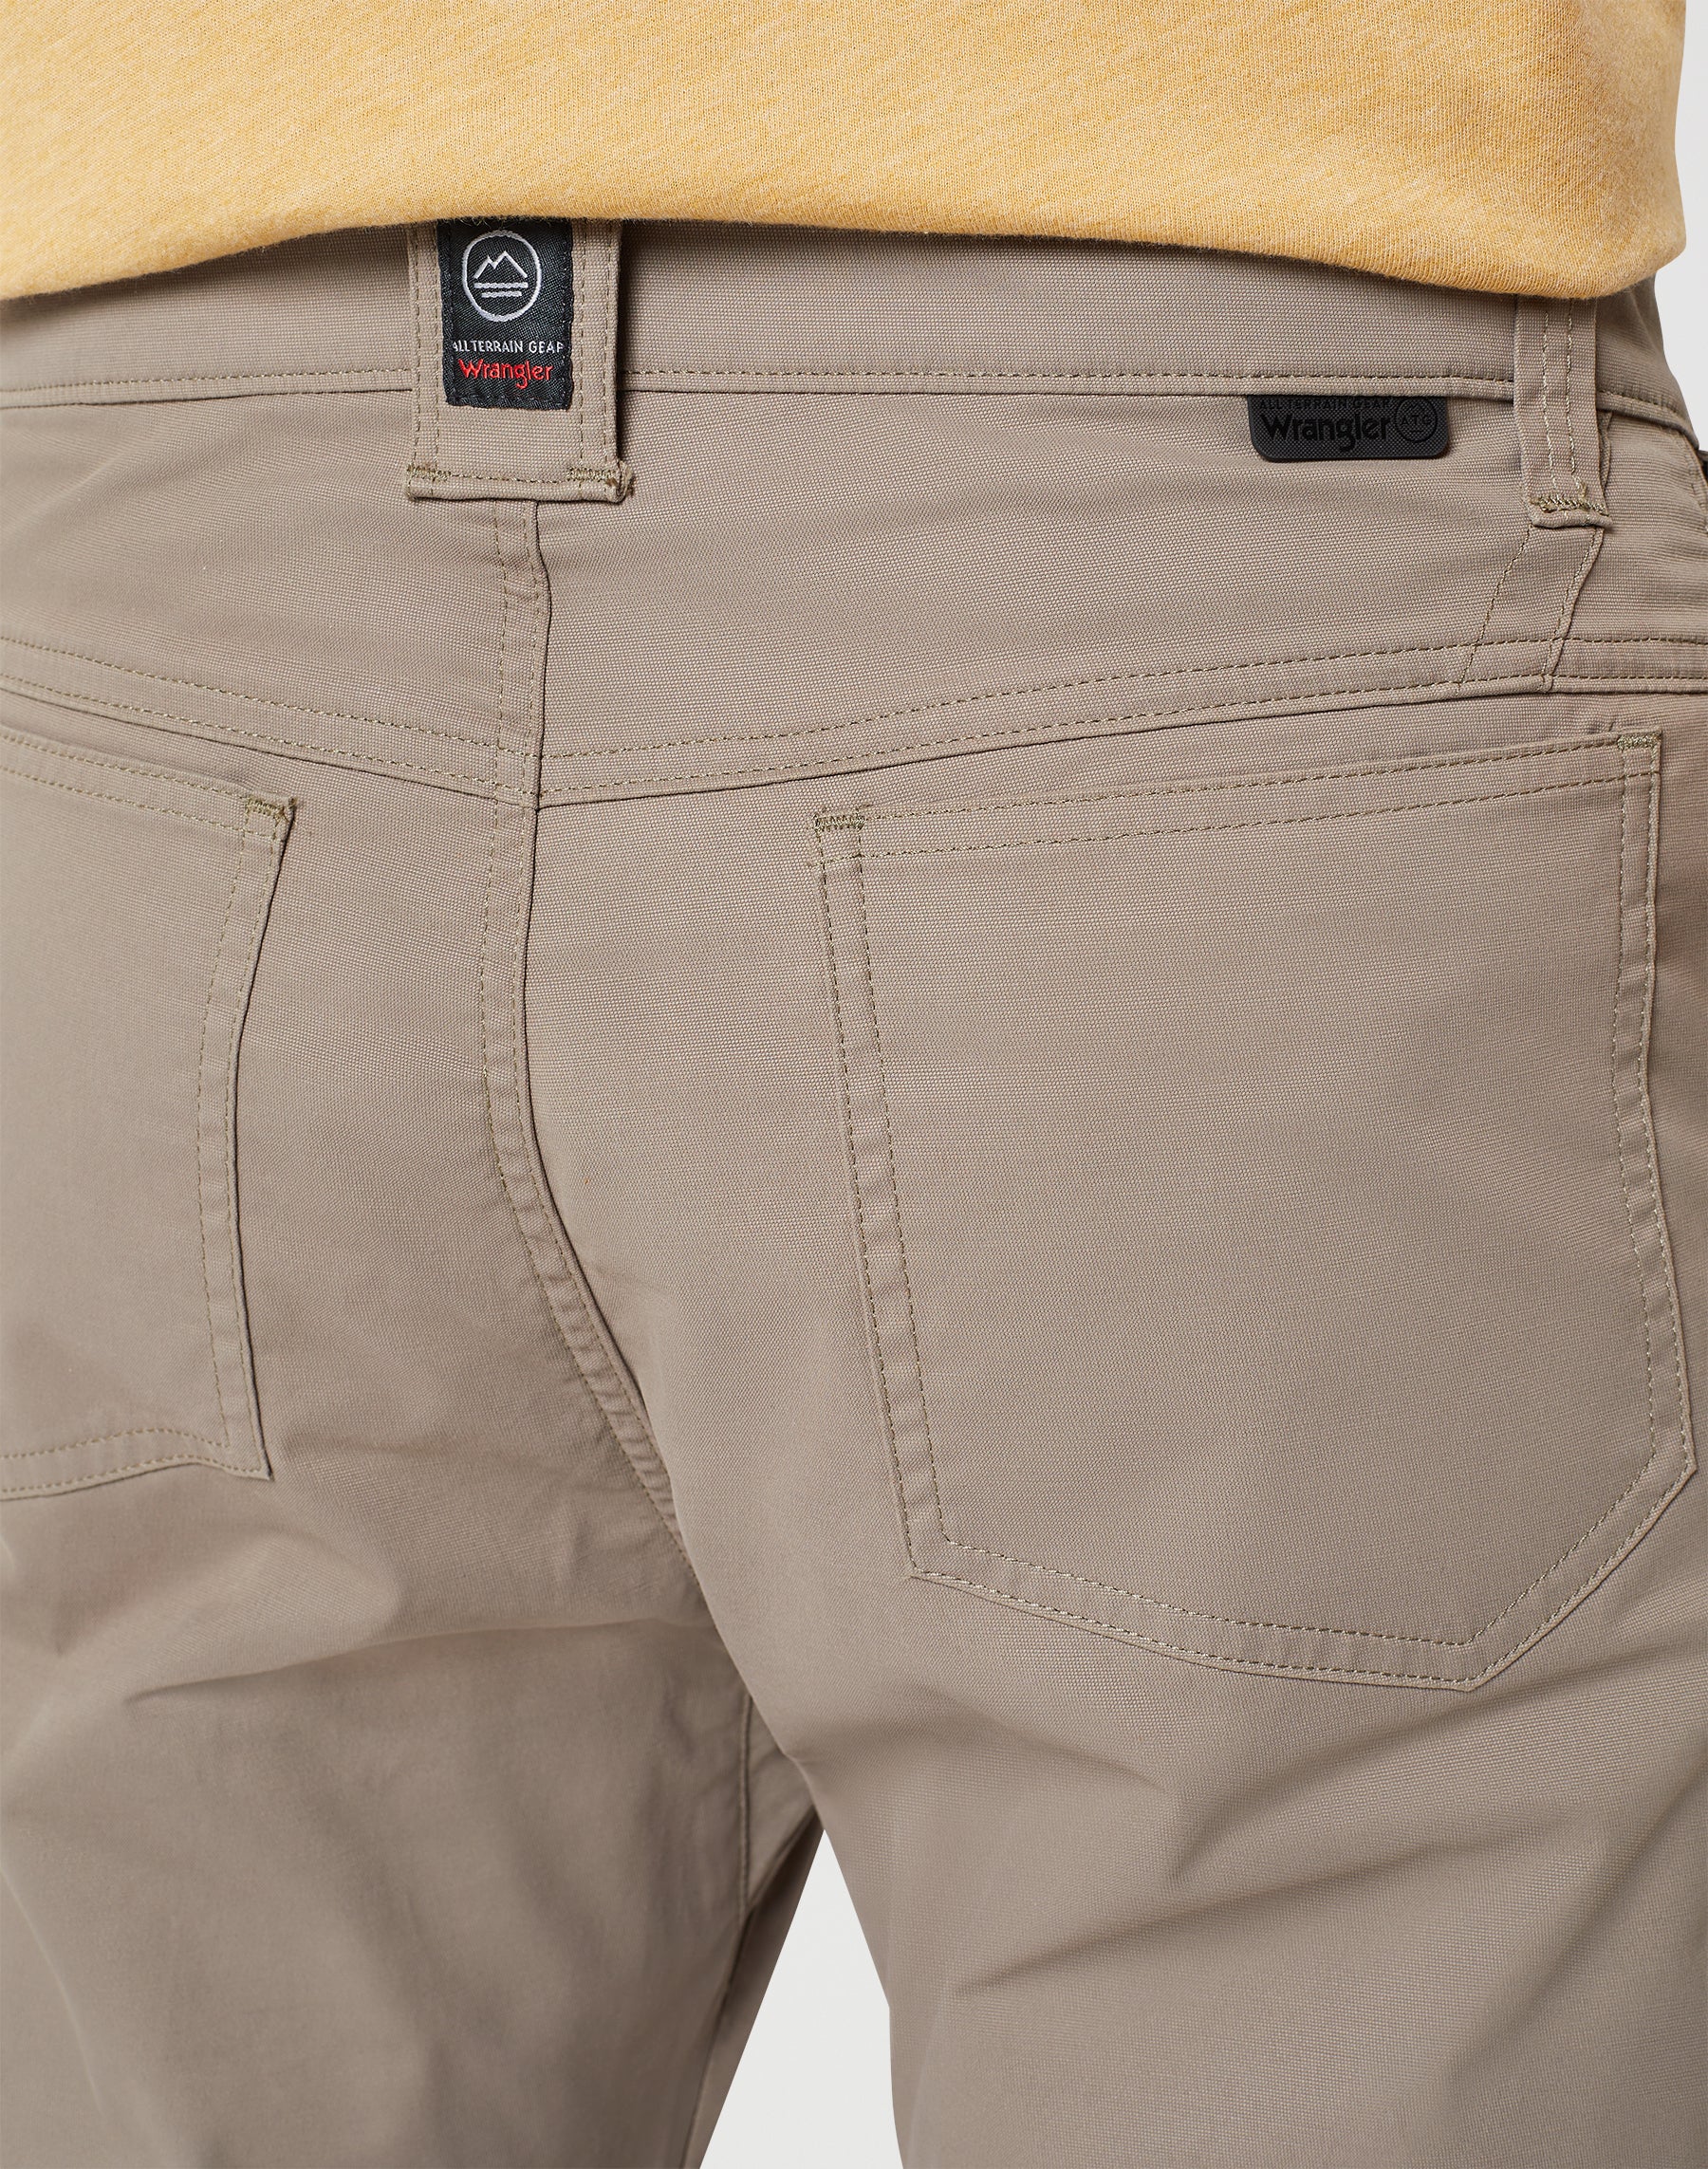 Sustainable Utility Pant in Bungee Cord Hosen Wrangler   